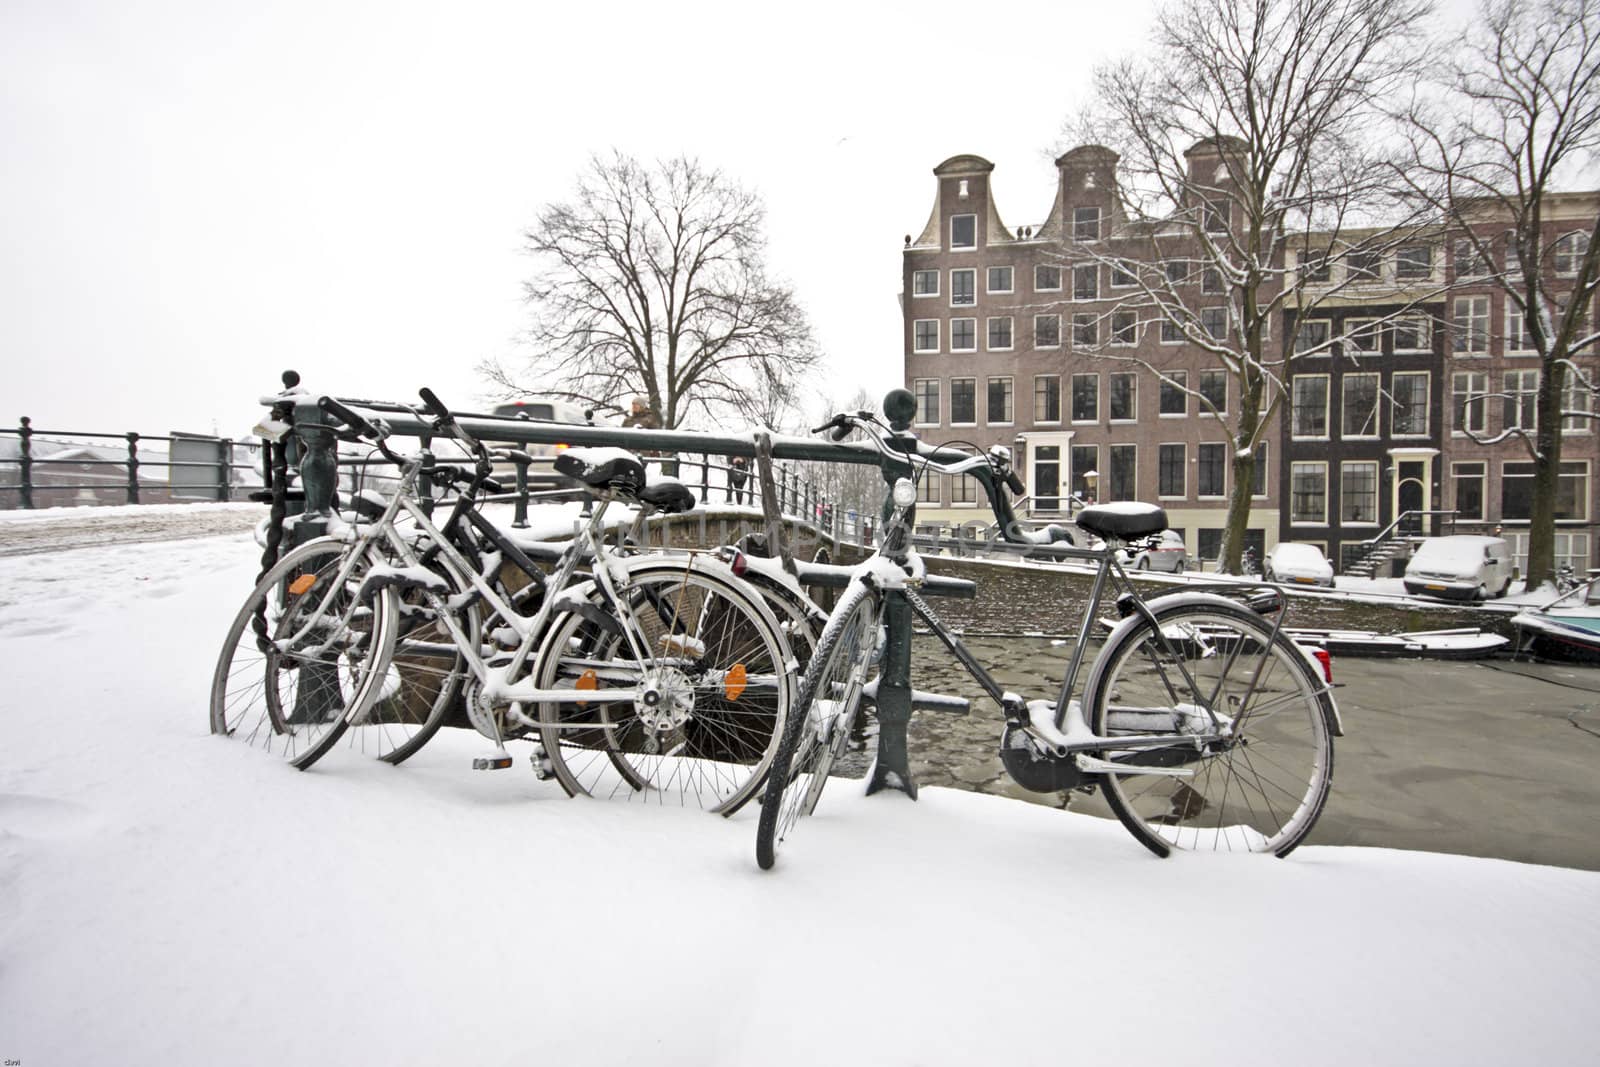 Snowy Amsterdam in wintertime in the Netherlands